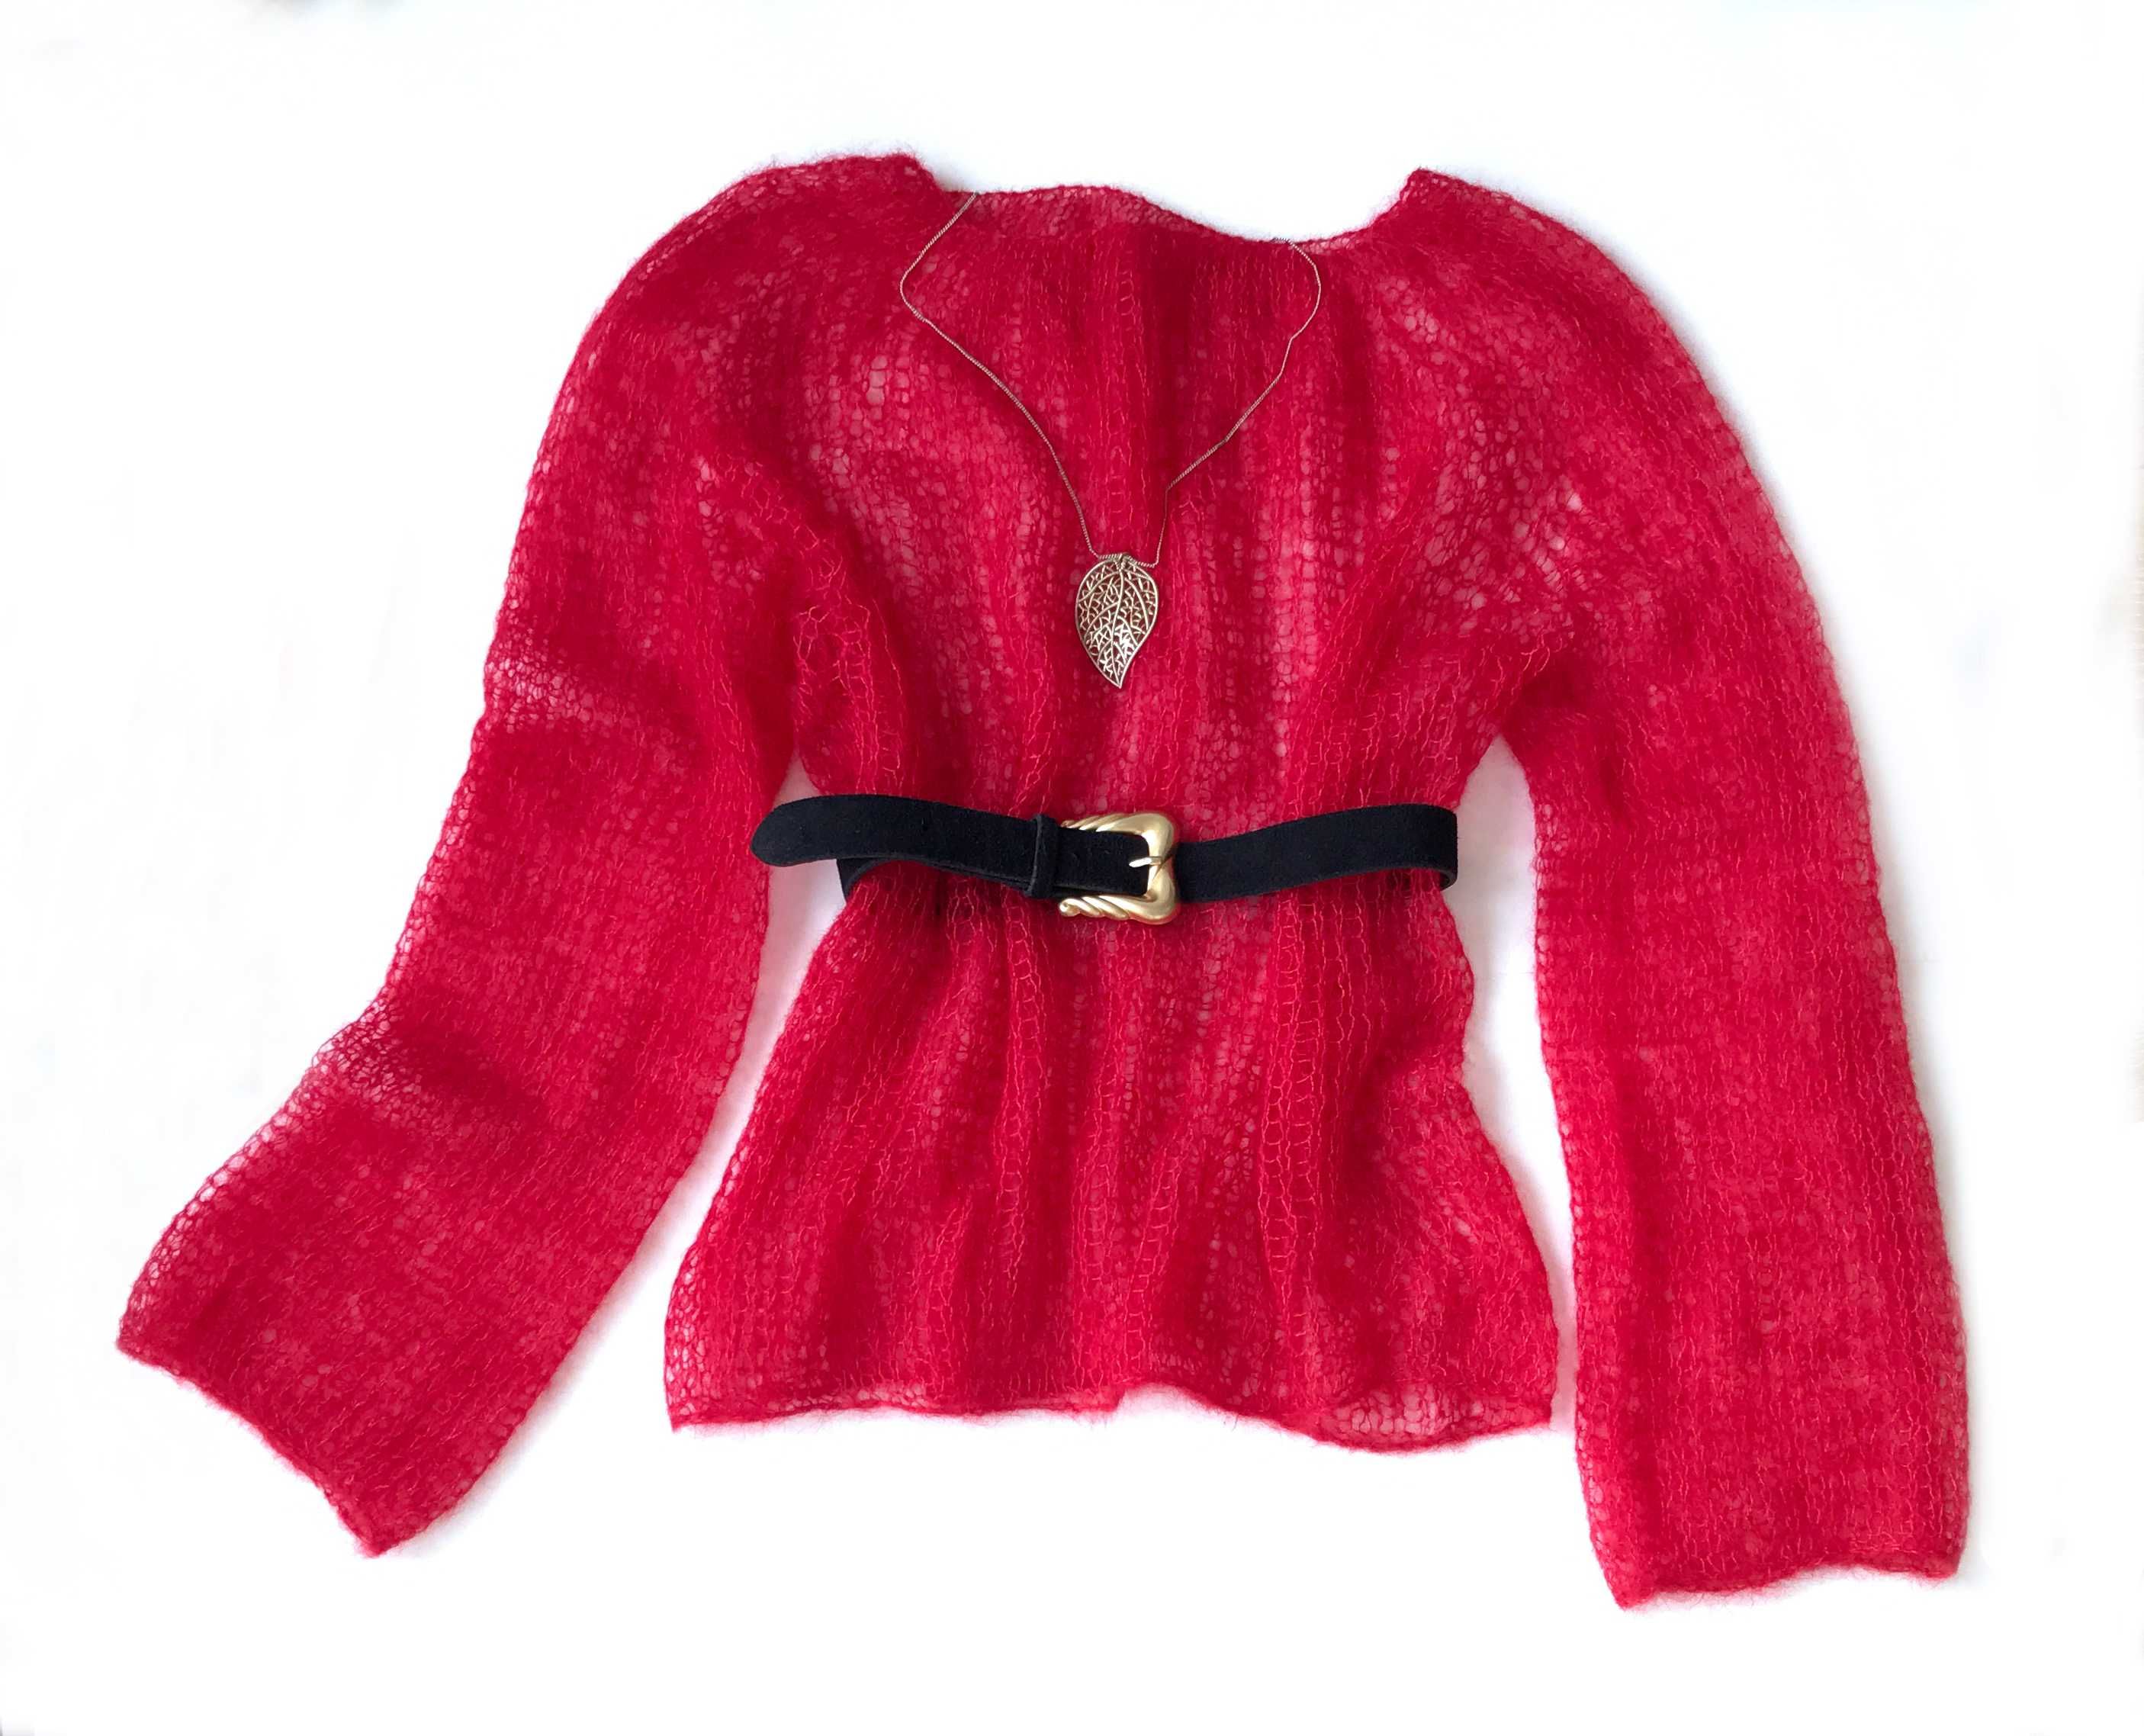 Camisola feita a mao. Oversized Red Kid Mohair and Silk Sweater.